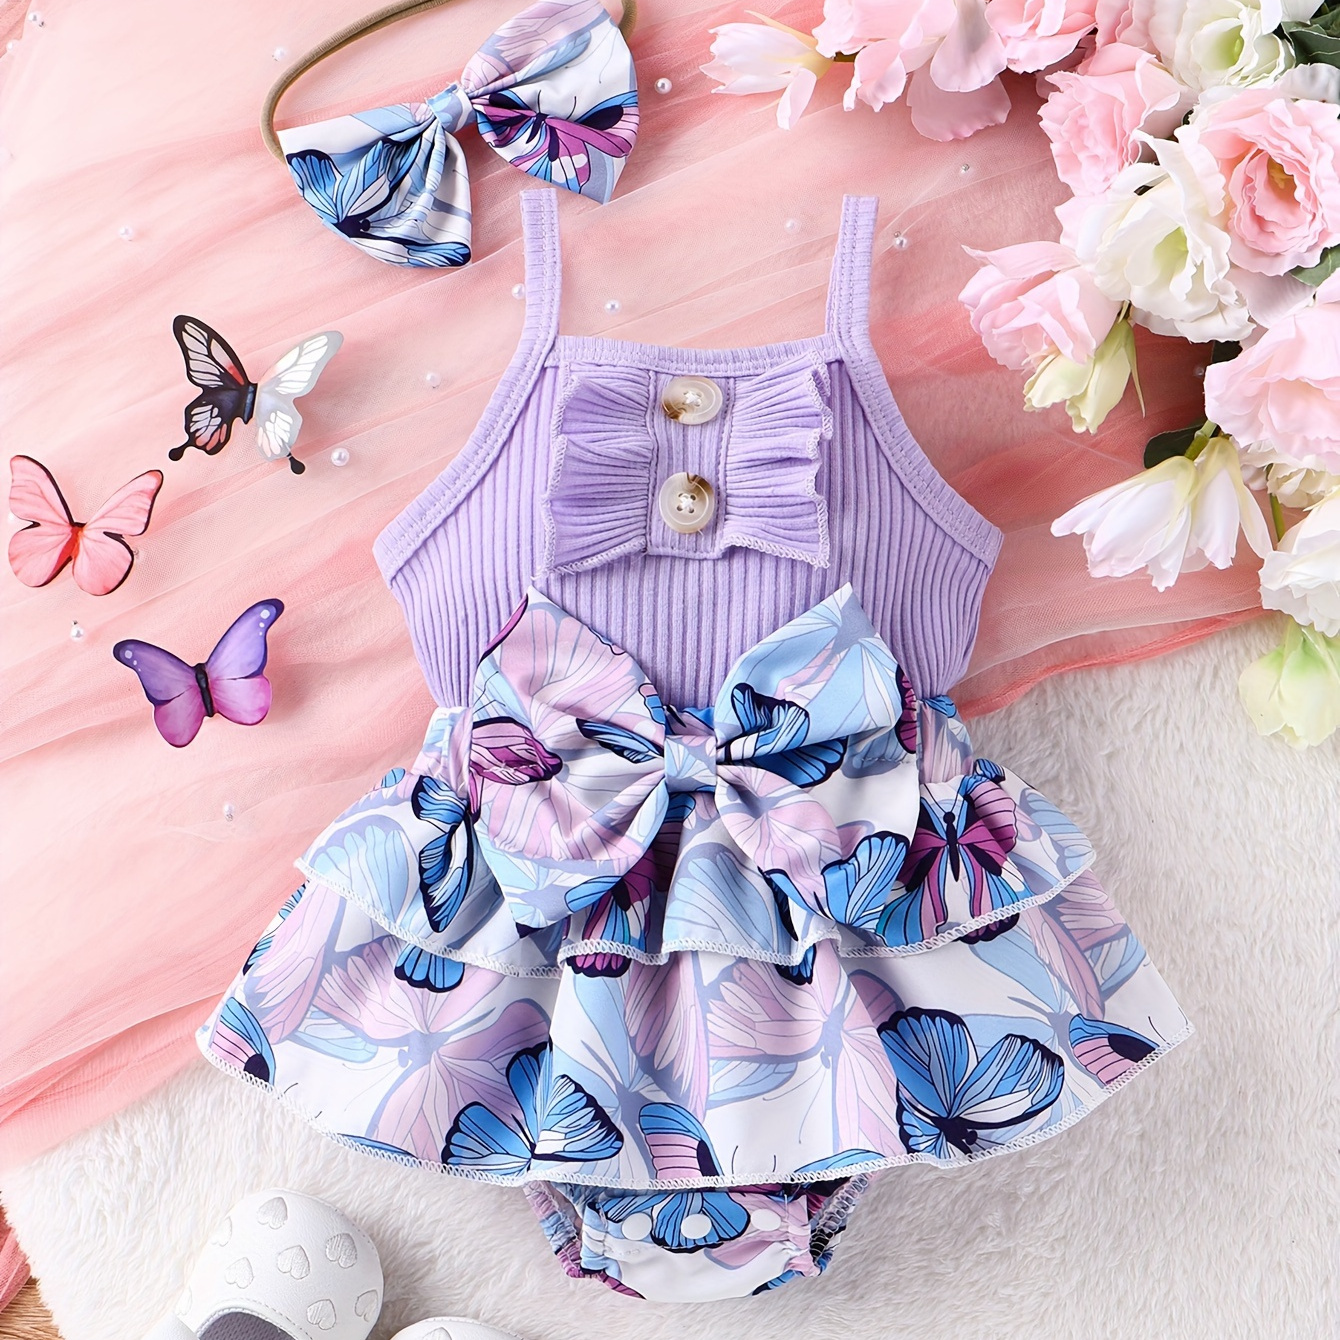 

Baby's Bowknot Decor Butterfly Pattern Triangle Bodysuit, Stylish Ribbed Sleeveless Layered Romper Dress, Toddler & Infant Girl's Onesie For Summer, As Gift